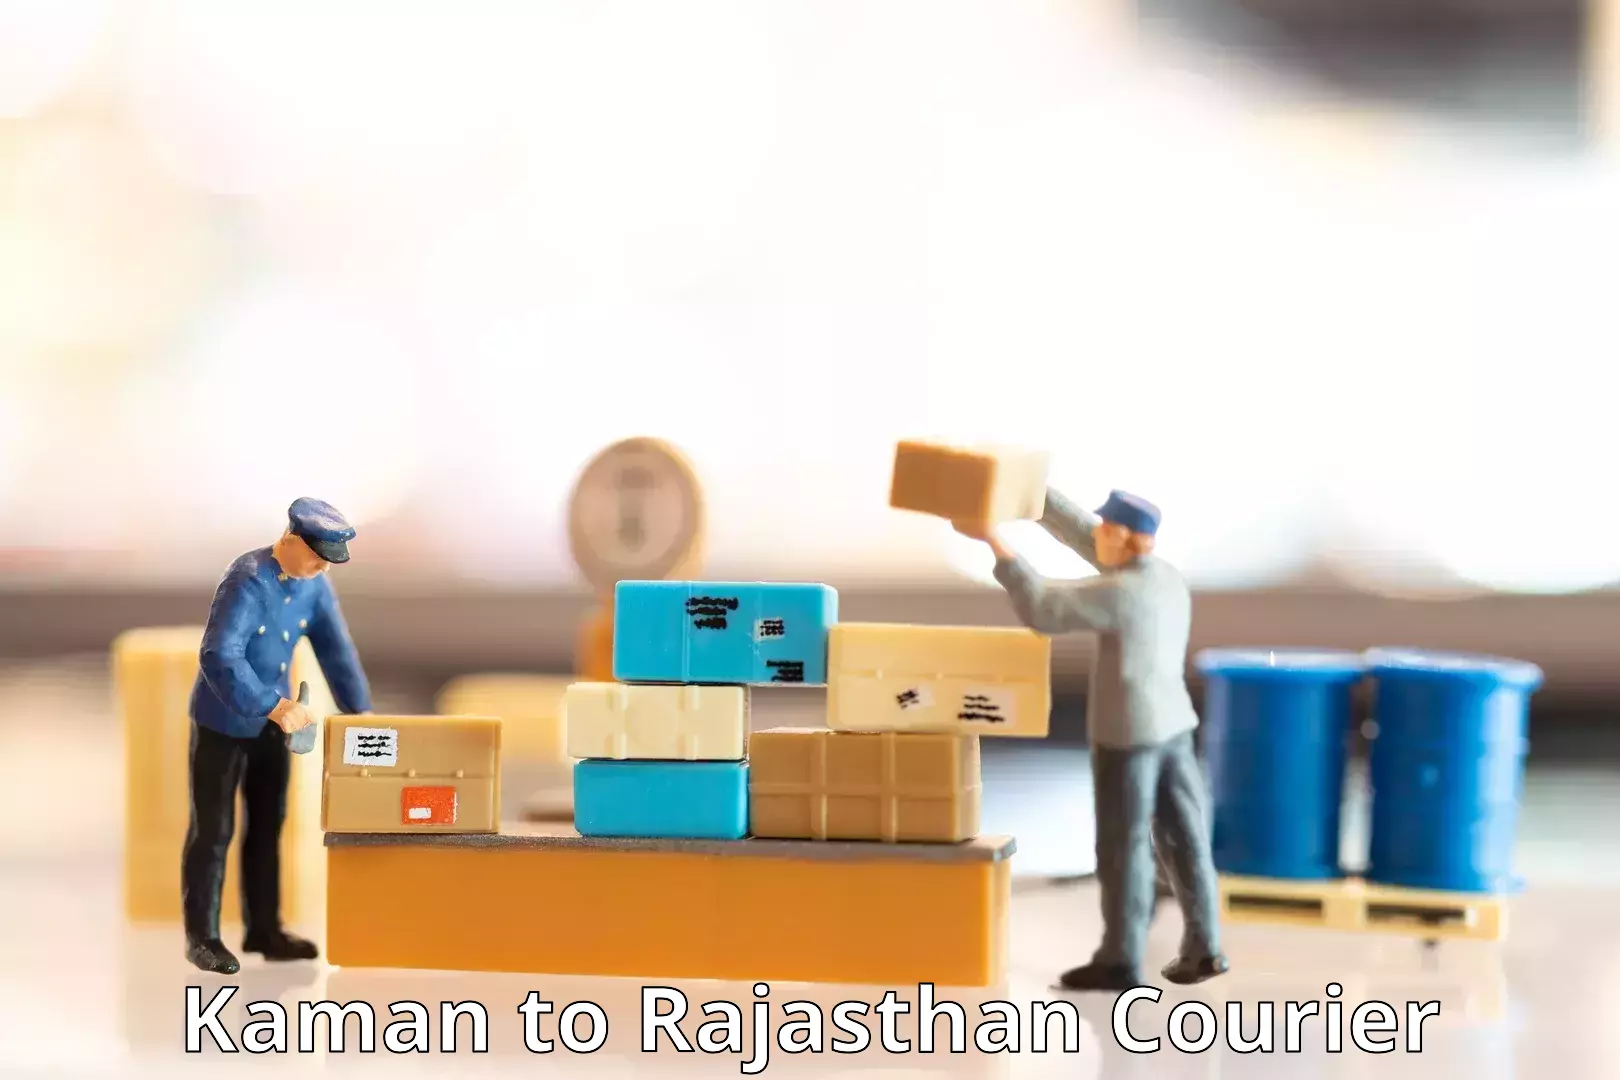 State-of-the-art courier technology Kaman to Rajasthan